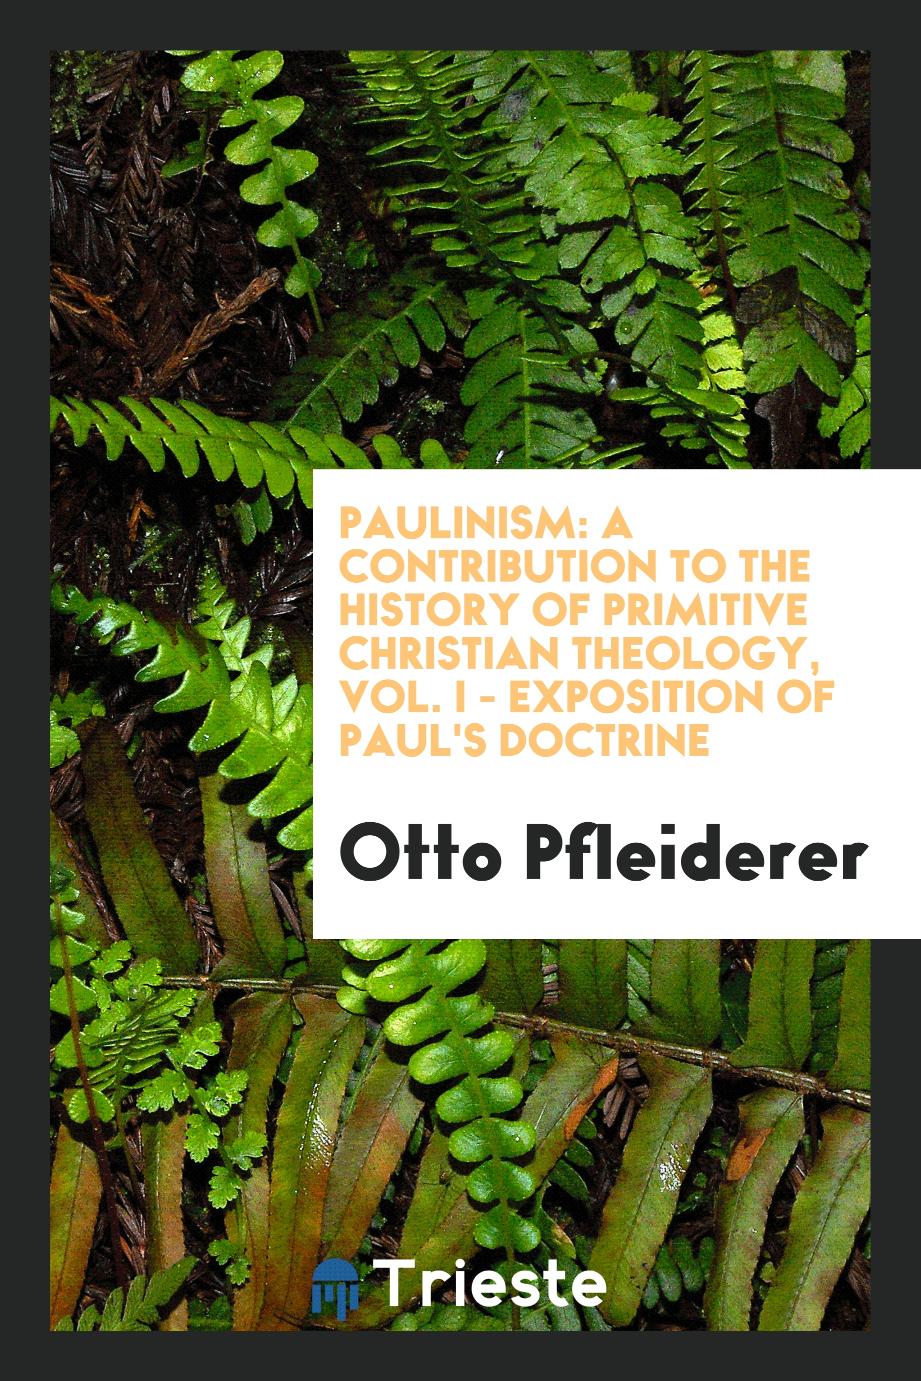 Paulinism: A Contribution to the History of Primitive Christian Theology, Vol. I - Exposition of Paul's Doctrine